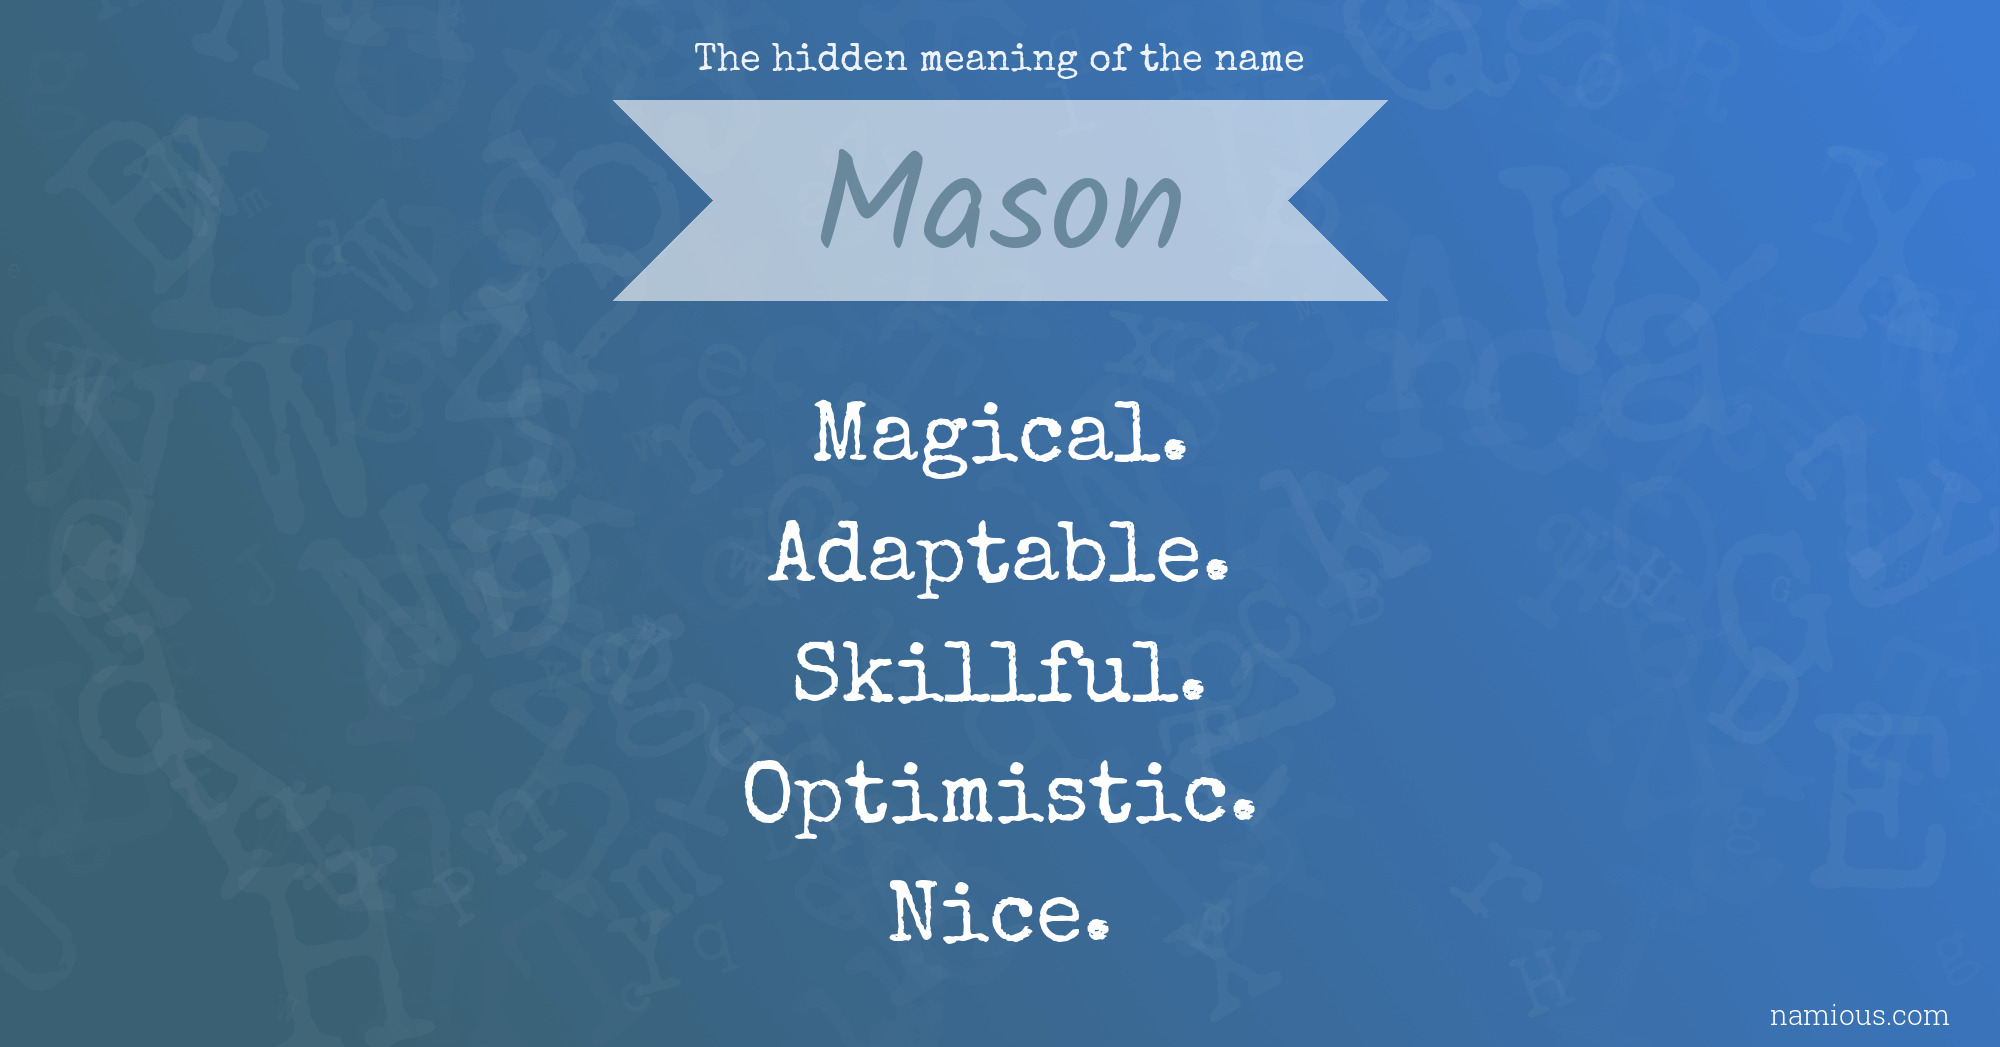 The hidden meaning of the name Mason